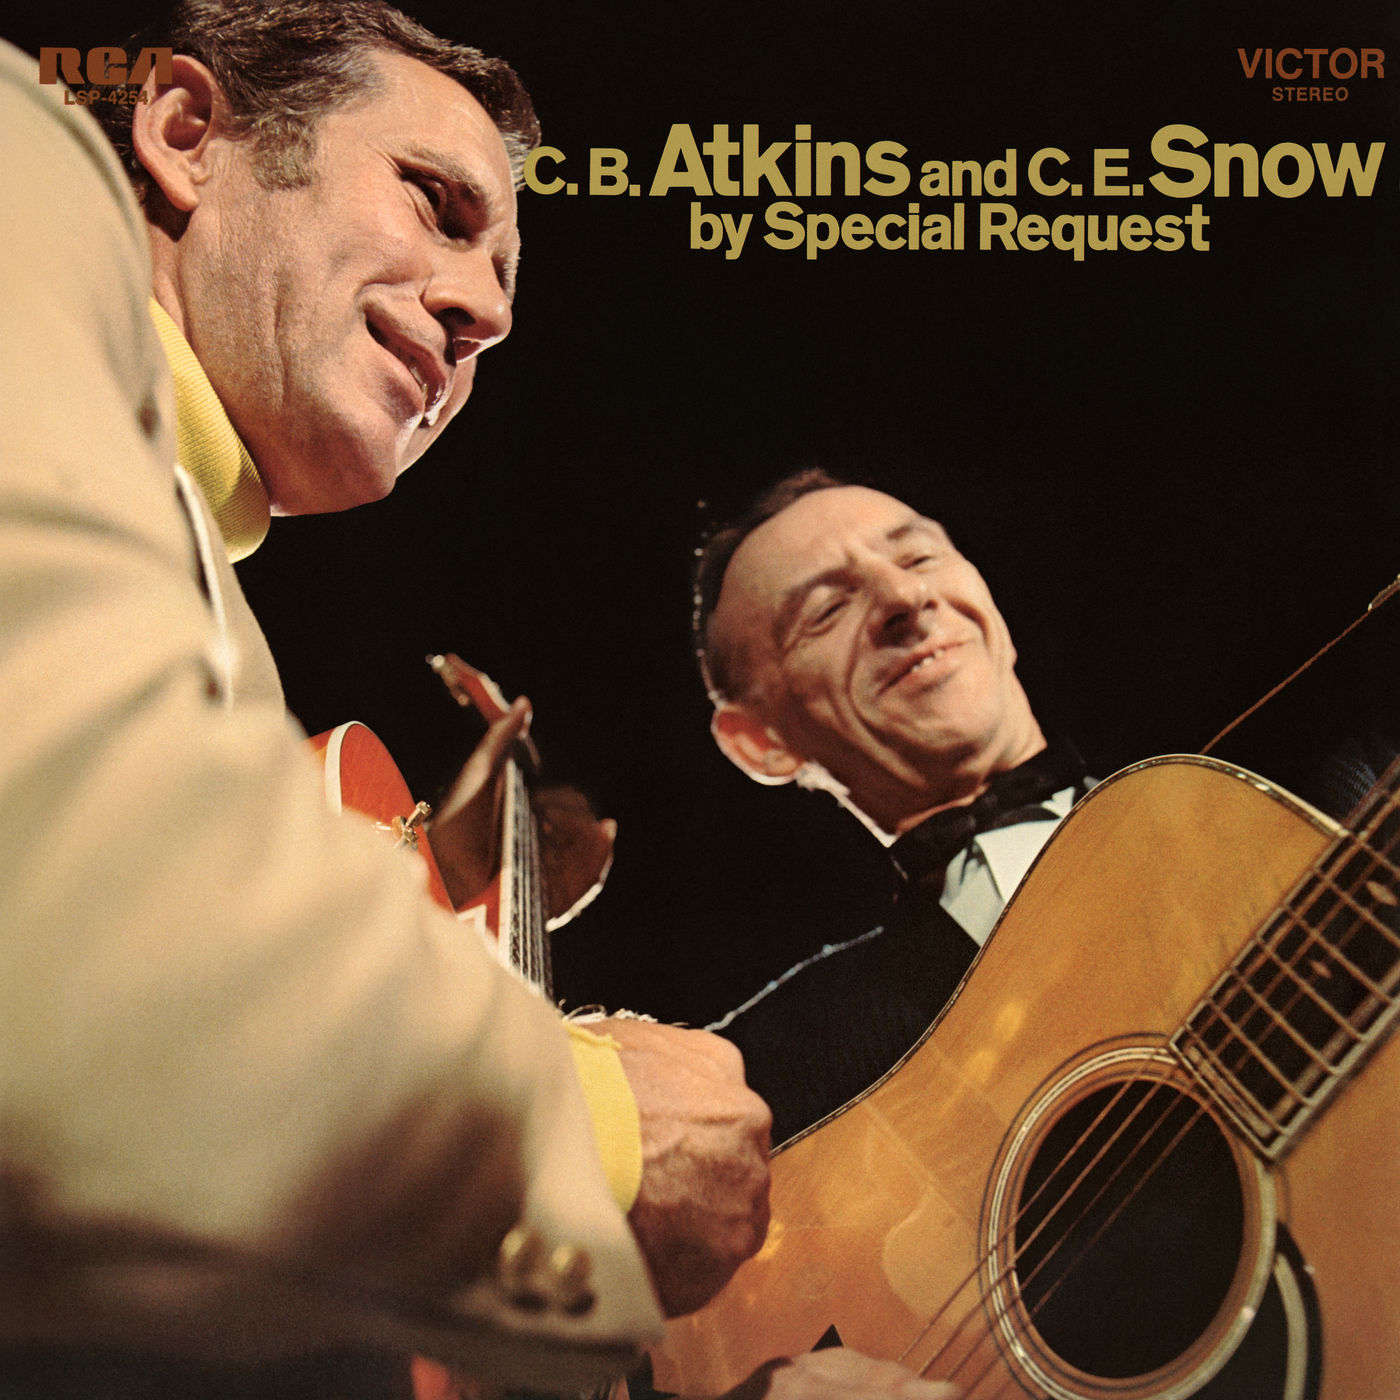 Chet Atkins – C. B. Atkins and C. E. Snow by Special Request